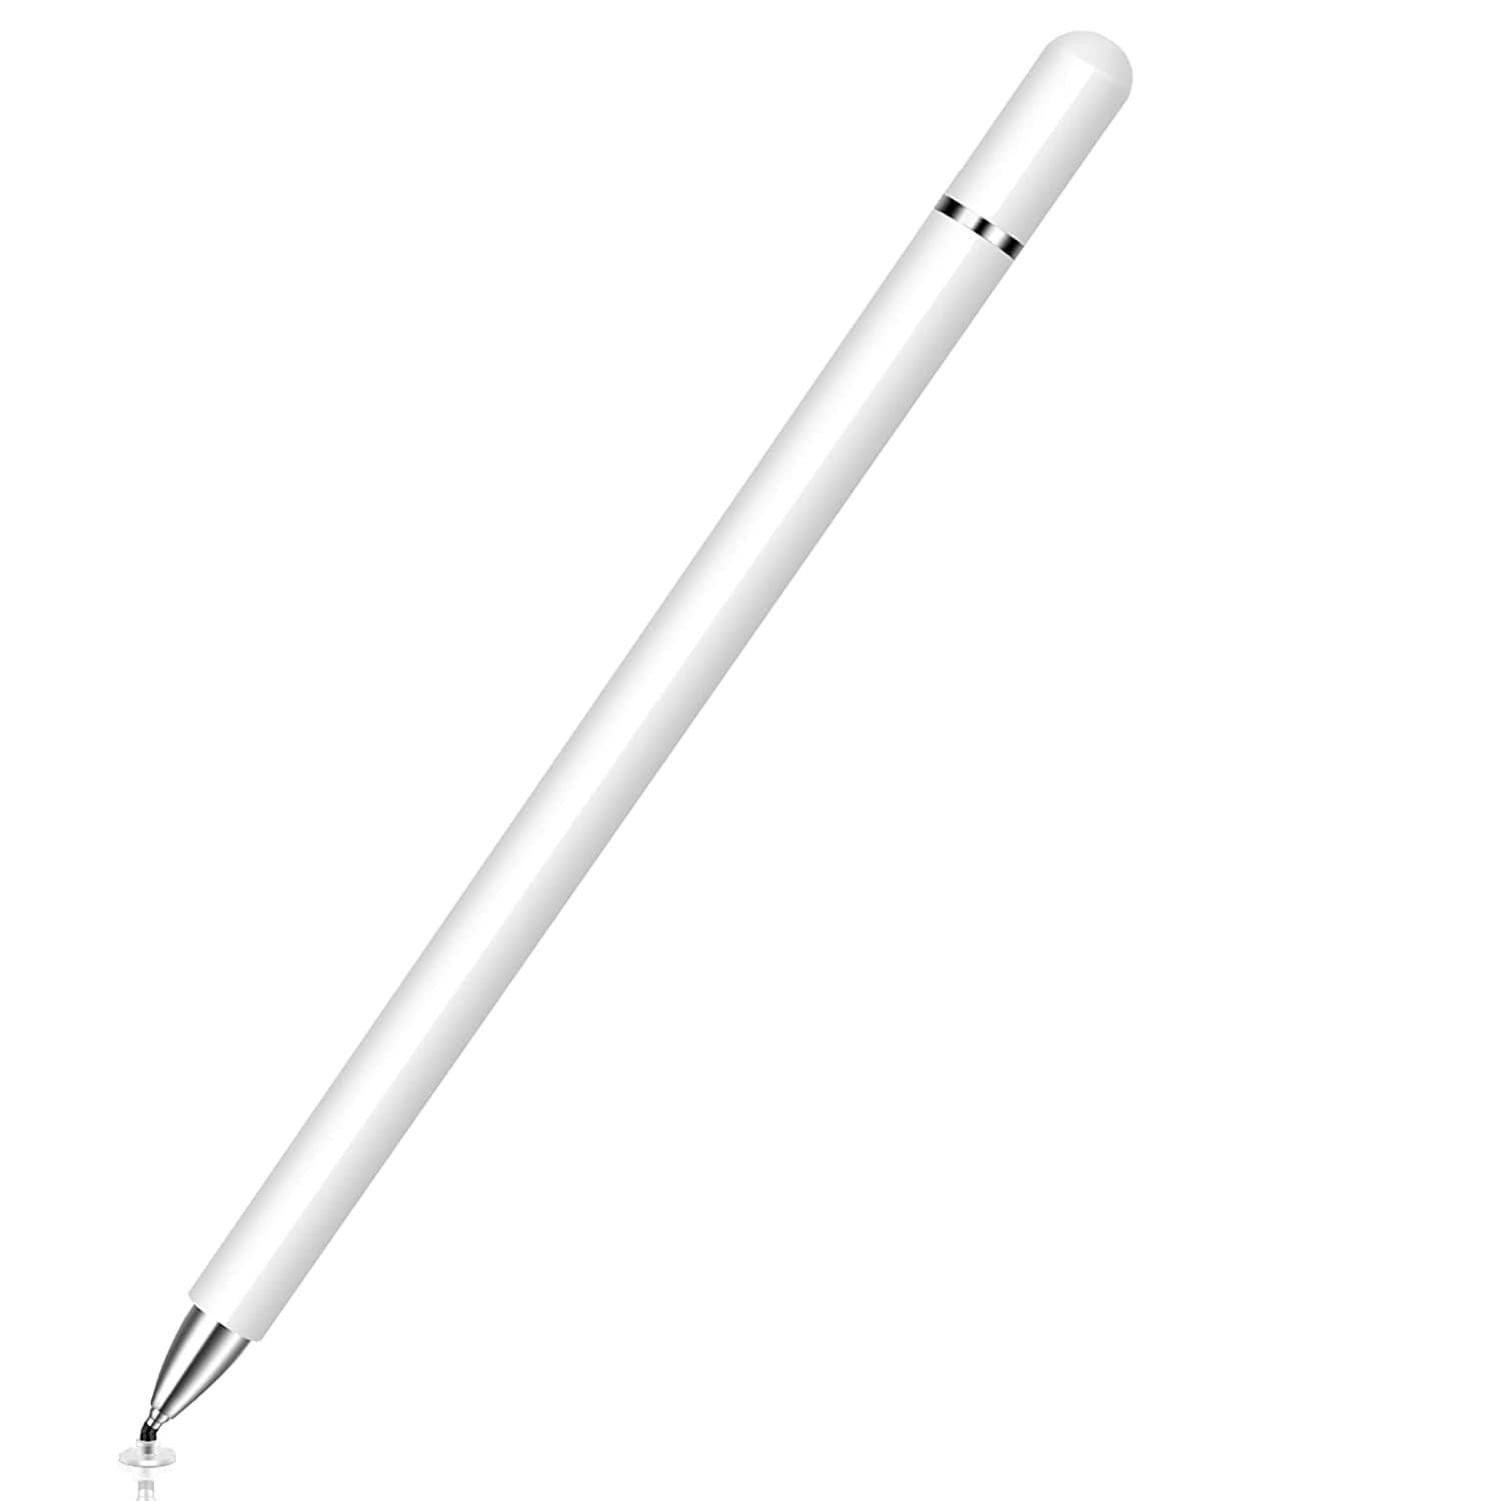 MAXCases  Active Capacitive Stylus/Pen for iPad (White)